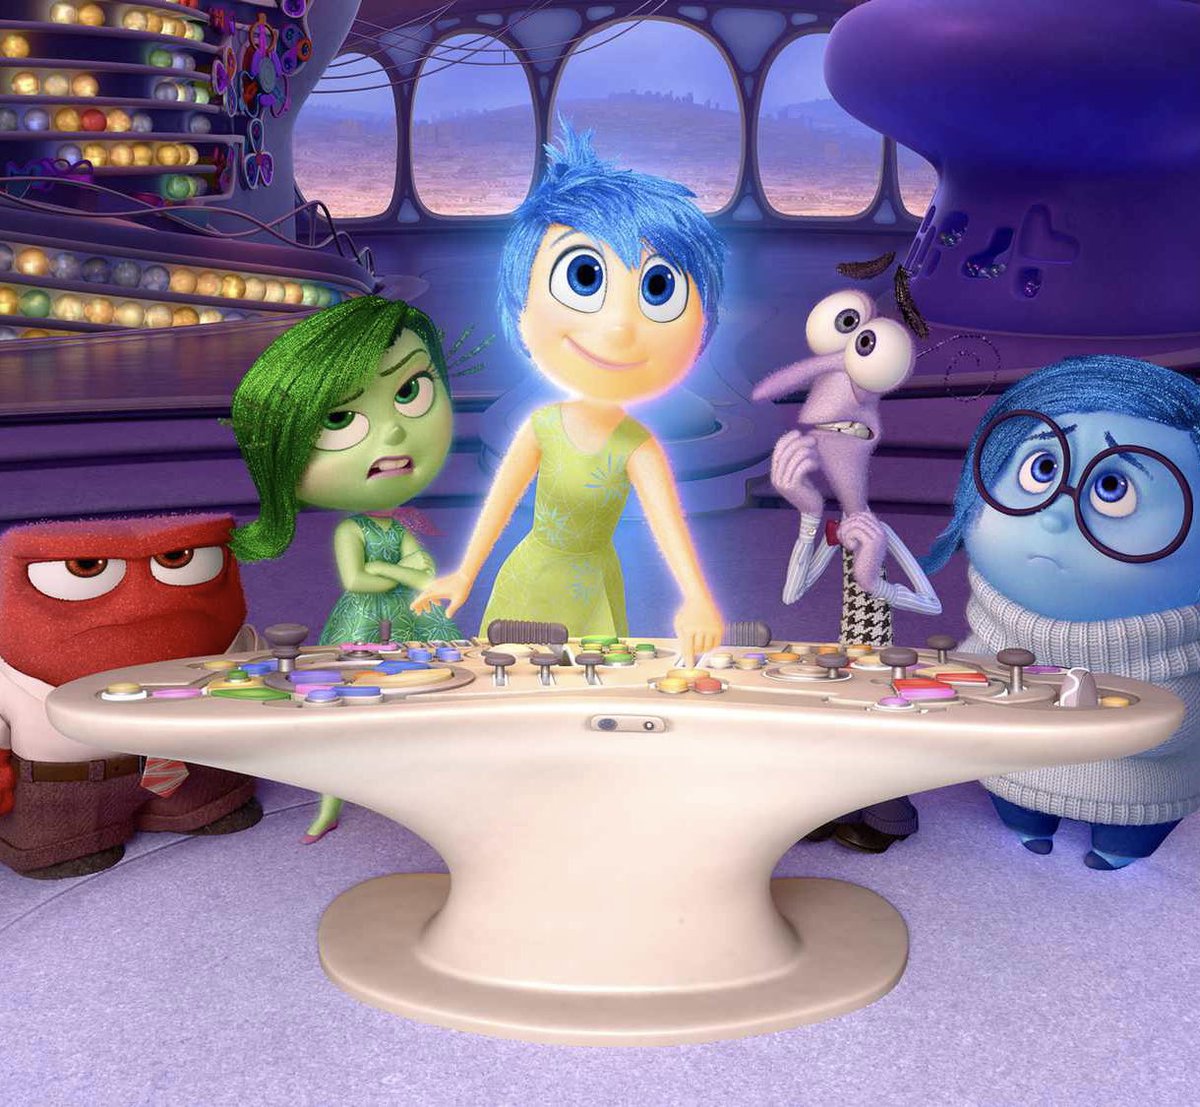 A ‘INSIDE OUT’ spin-off series is in the works for Disney+

The series will follow Dream Productions, the movie studio inside Riley’s mind that makes up her dreams.

(Source: bloomberg.com/news/features/…)